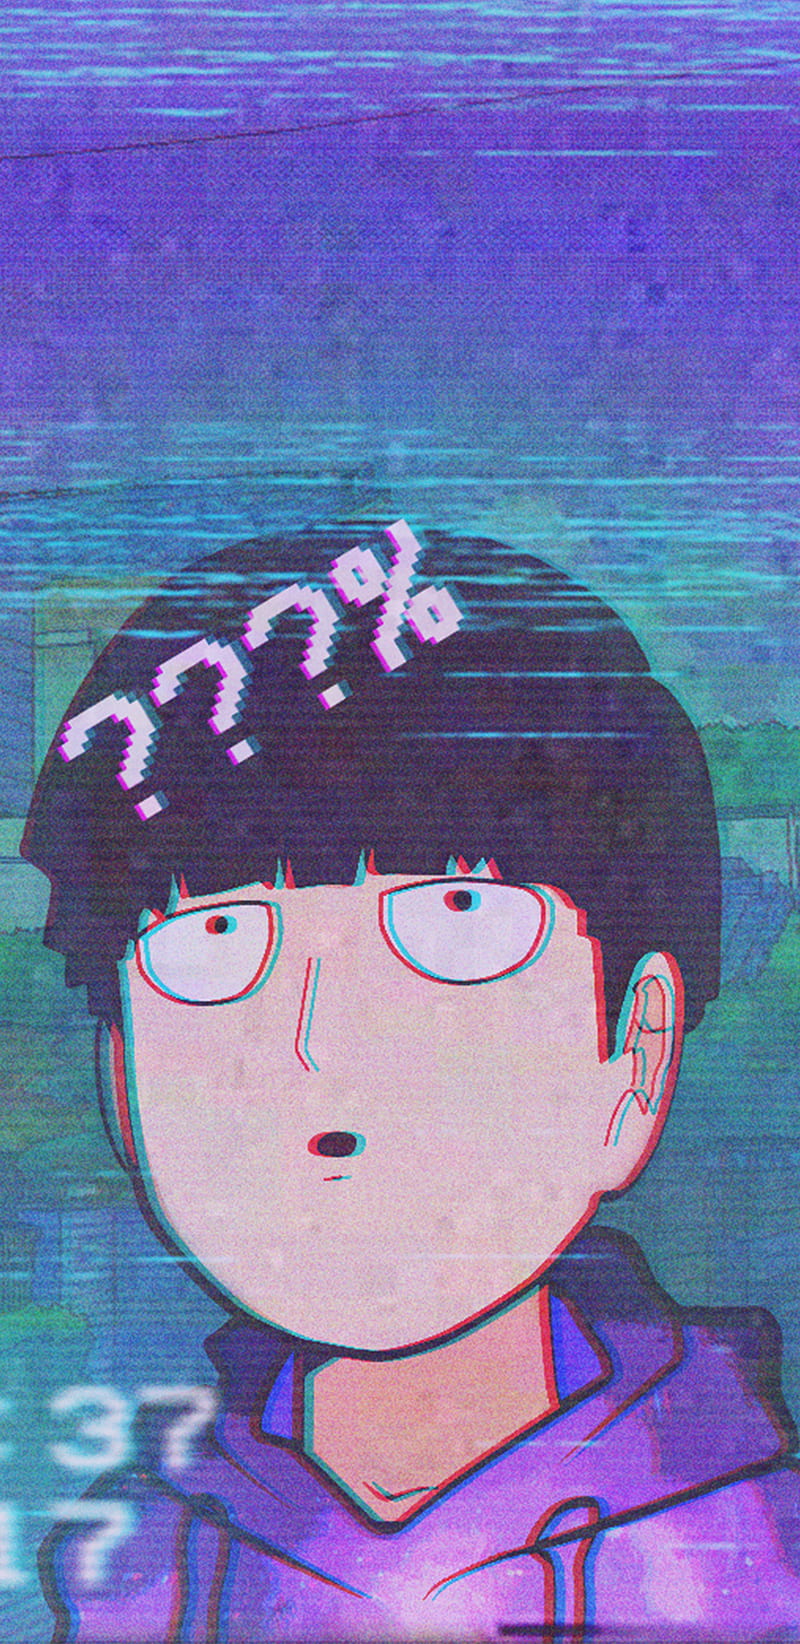 100+] Anime Pfp Aesthetic Wallpapers